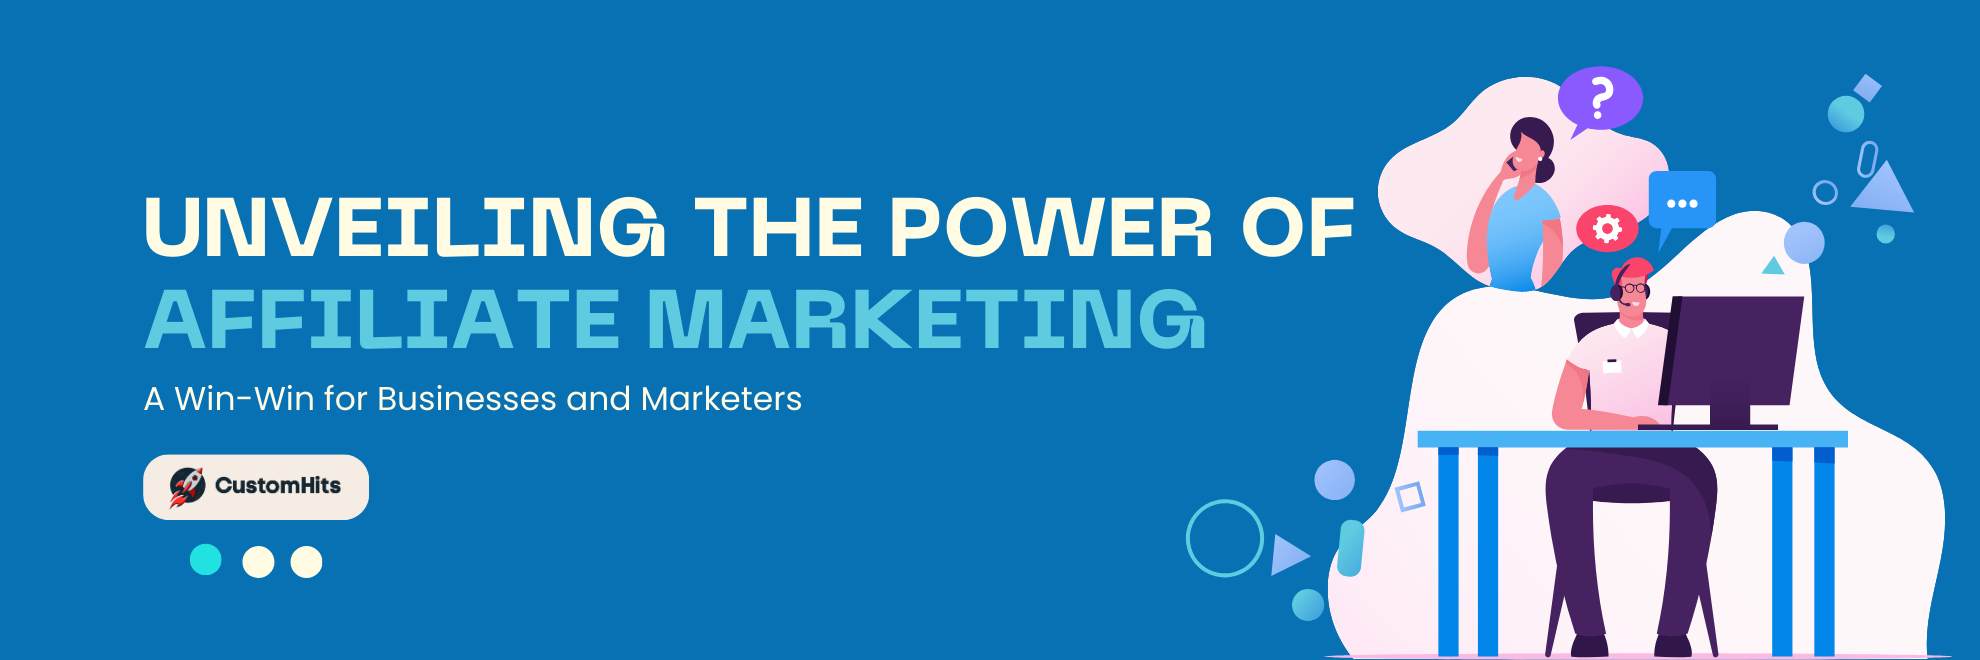 Unveiling the Power of Affiliate Marketing: A Win-Win for Businesses and Marketers 